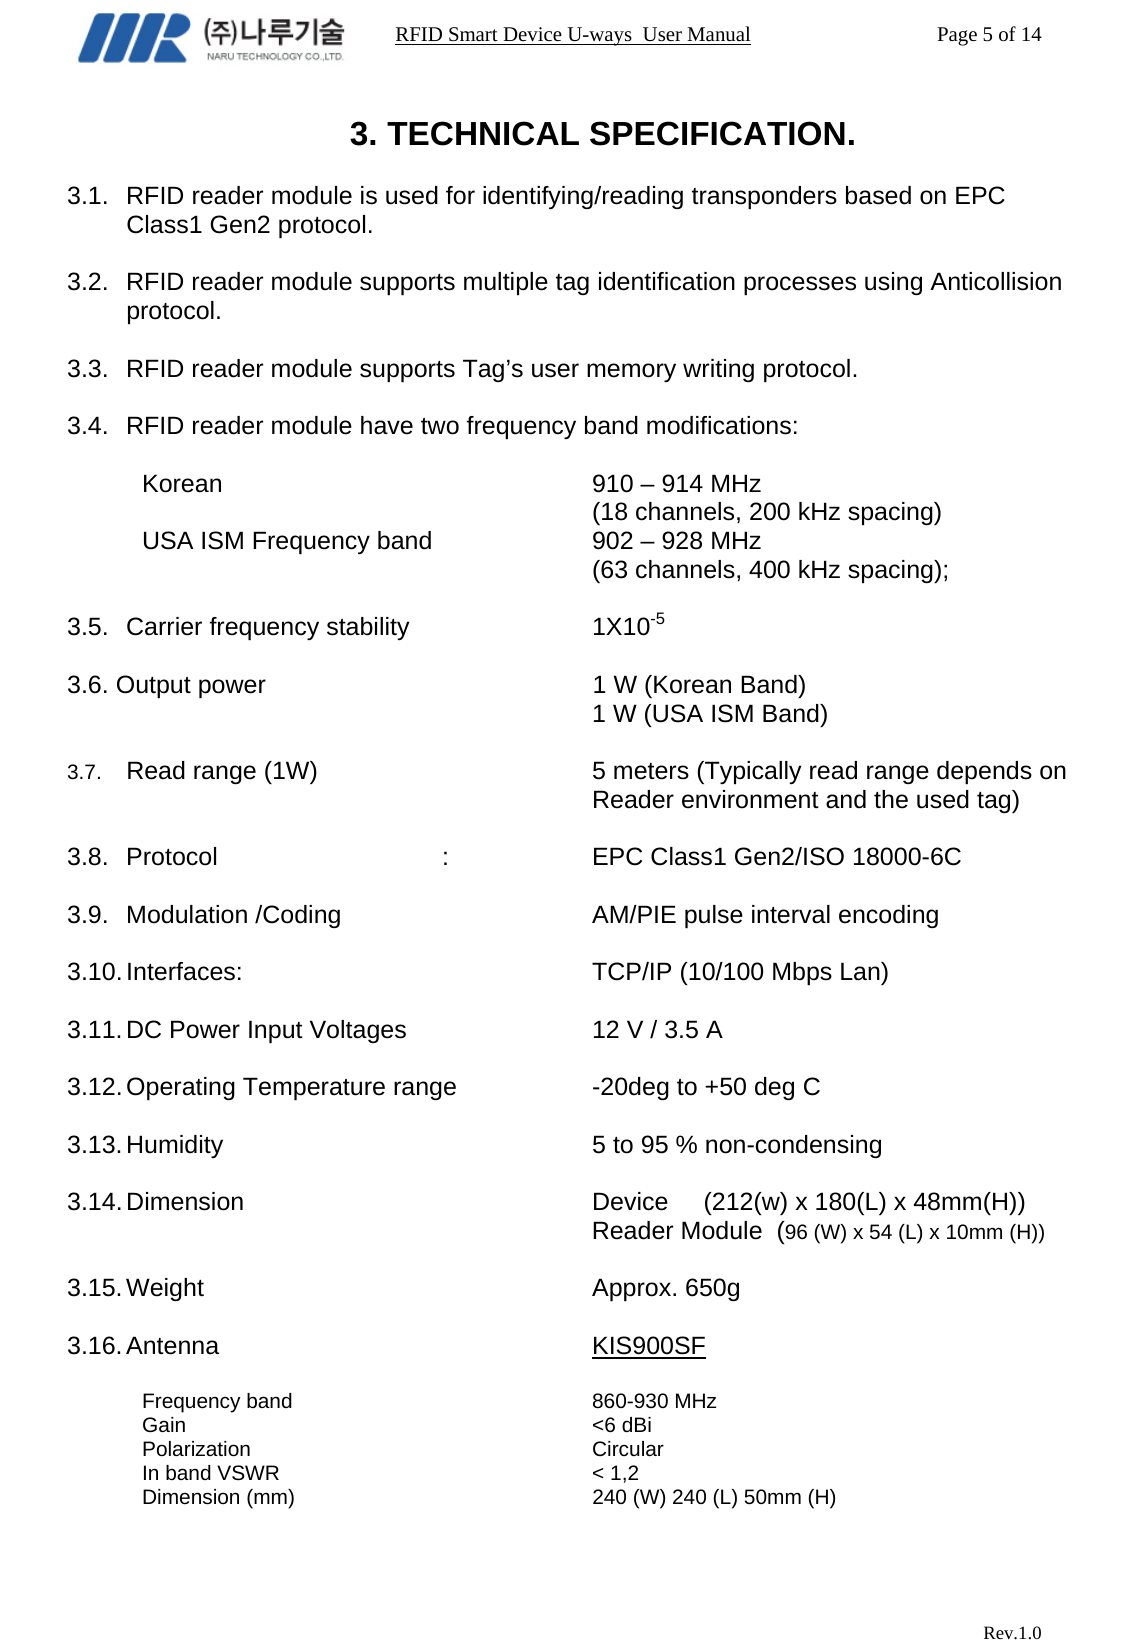                                                                RFID Smart Device U-ways  User Manual           Page 5 of 14                            Rev.1.0 3. TECHNICAL SPECIFICATION.  3.1.  RFID reader module is used for identifying/reading transponders based on EPC Class1 Gen2 protocol.  3.2.  RFID reader module supports multiple tag identification processes using Anticollision protocol.  3.3.  RFID reader module supports Tag’s user memory writing protocol.  3.4.  RFID reader module have two frequency band modifications:   Korean     910 – 914 MHz (18 channels, 200 kHz spacing) USA ISM Frequency band      902 – 928 MHz (63 channels, 400 kHz spacing);  3.5.  Carrier frequency stability      1X10-5  3.6. Output power               1 W (Korean Band) 1 W (USA ISM Band)  3.7.  Read range (1W)        5 meters (Typically read range depends on Reader environment and the used tag)  3.8. Protocol   :   EPC Class1 Gen2/ISO 18000-6C  3.9.  Modulation /Coding        AM/PIE pulse interval encoding  3.10. Interfaces:     TCP/IP (10/100 Mbps Lan)  3.11. DC Power Input Voltages      12 V / 3.5 A  3.12. Operating  Temperature range    -20deg to +50 deg C  3.13. Humidity     5 to 95 % non-condensing  3.14. Dimension          Device     (212(w) x 180(L) x 48mm(H))                                                                    Reader Module  (96 (W) x 54 (L) x 10mm (H))  3.15. Weight      Approx. 650g  3.16. Antenna      KIS900SF  Frequency band    860-930 MHz Gain      &lt;6 dBi Polarization     Circular  In band VSWR     &lt; 1,2 Dimension (mm)        240 (W) 240 (L) 50mm (H) 